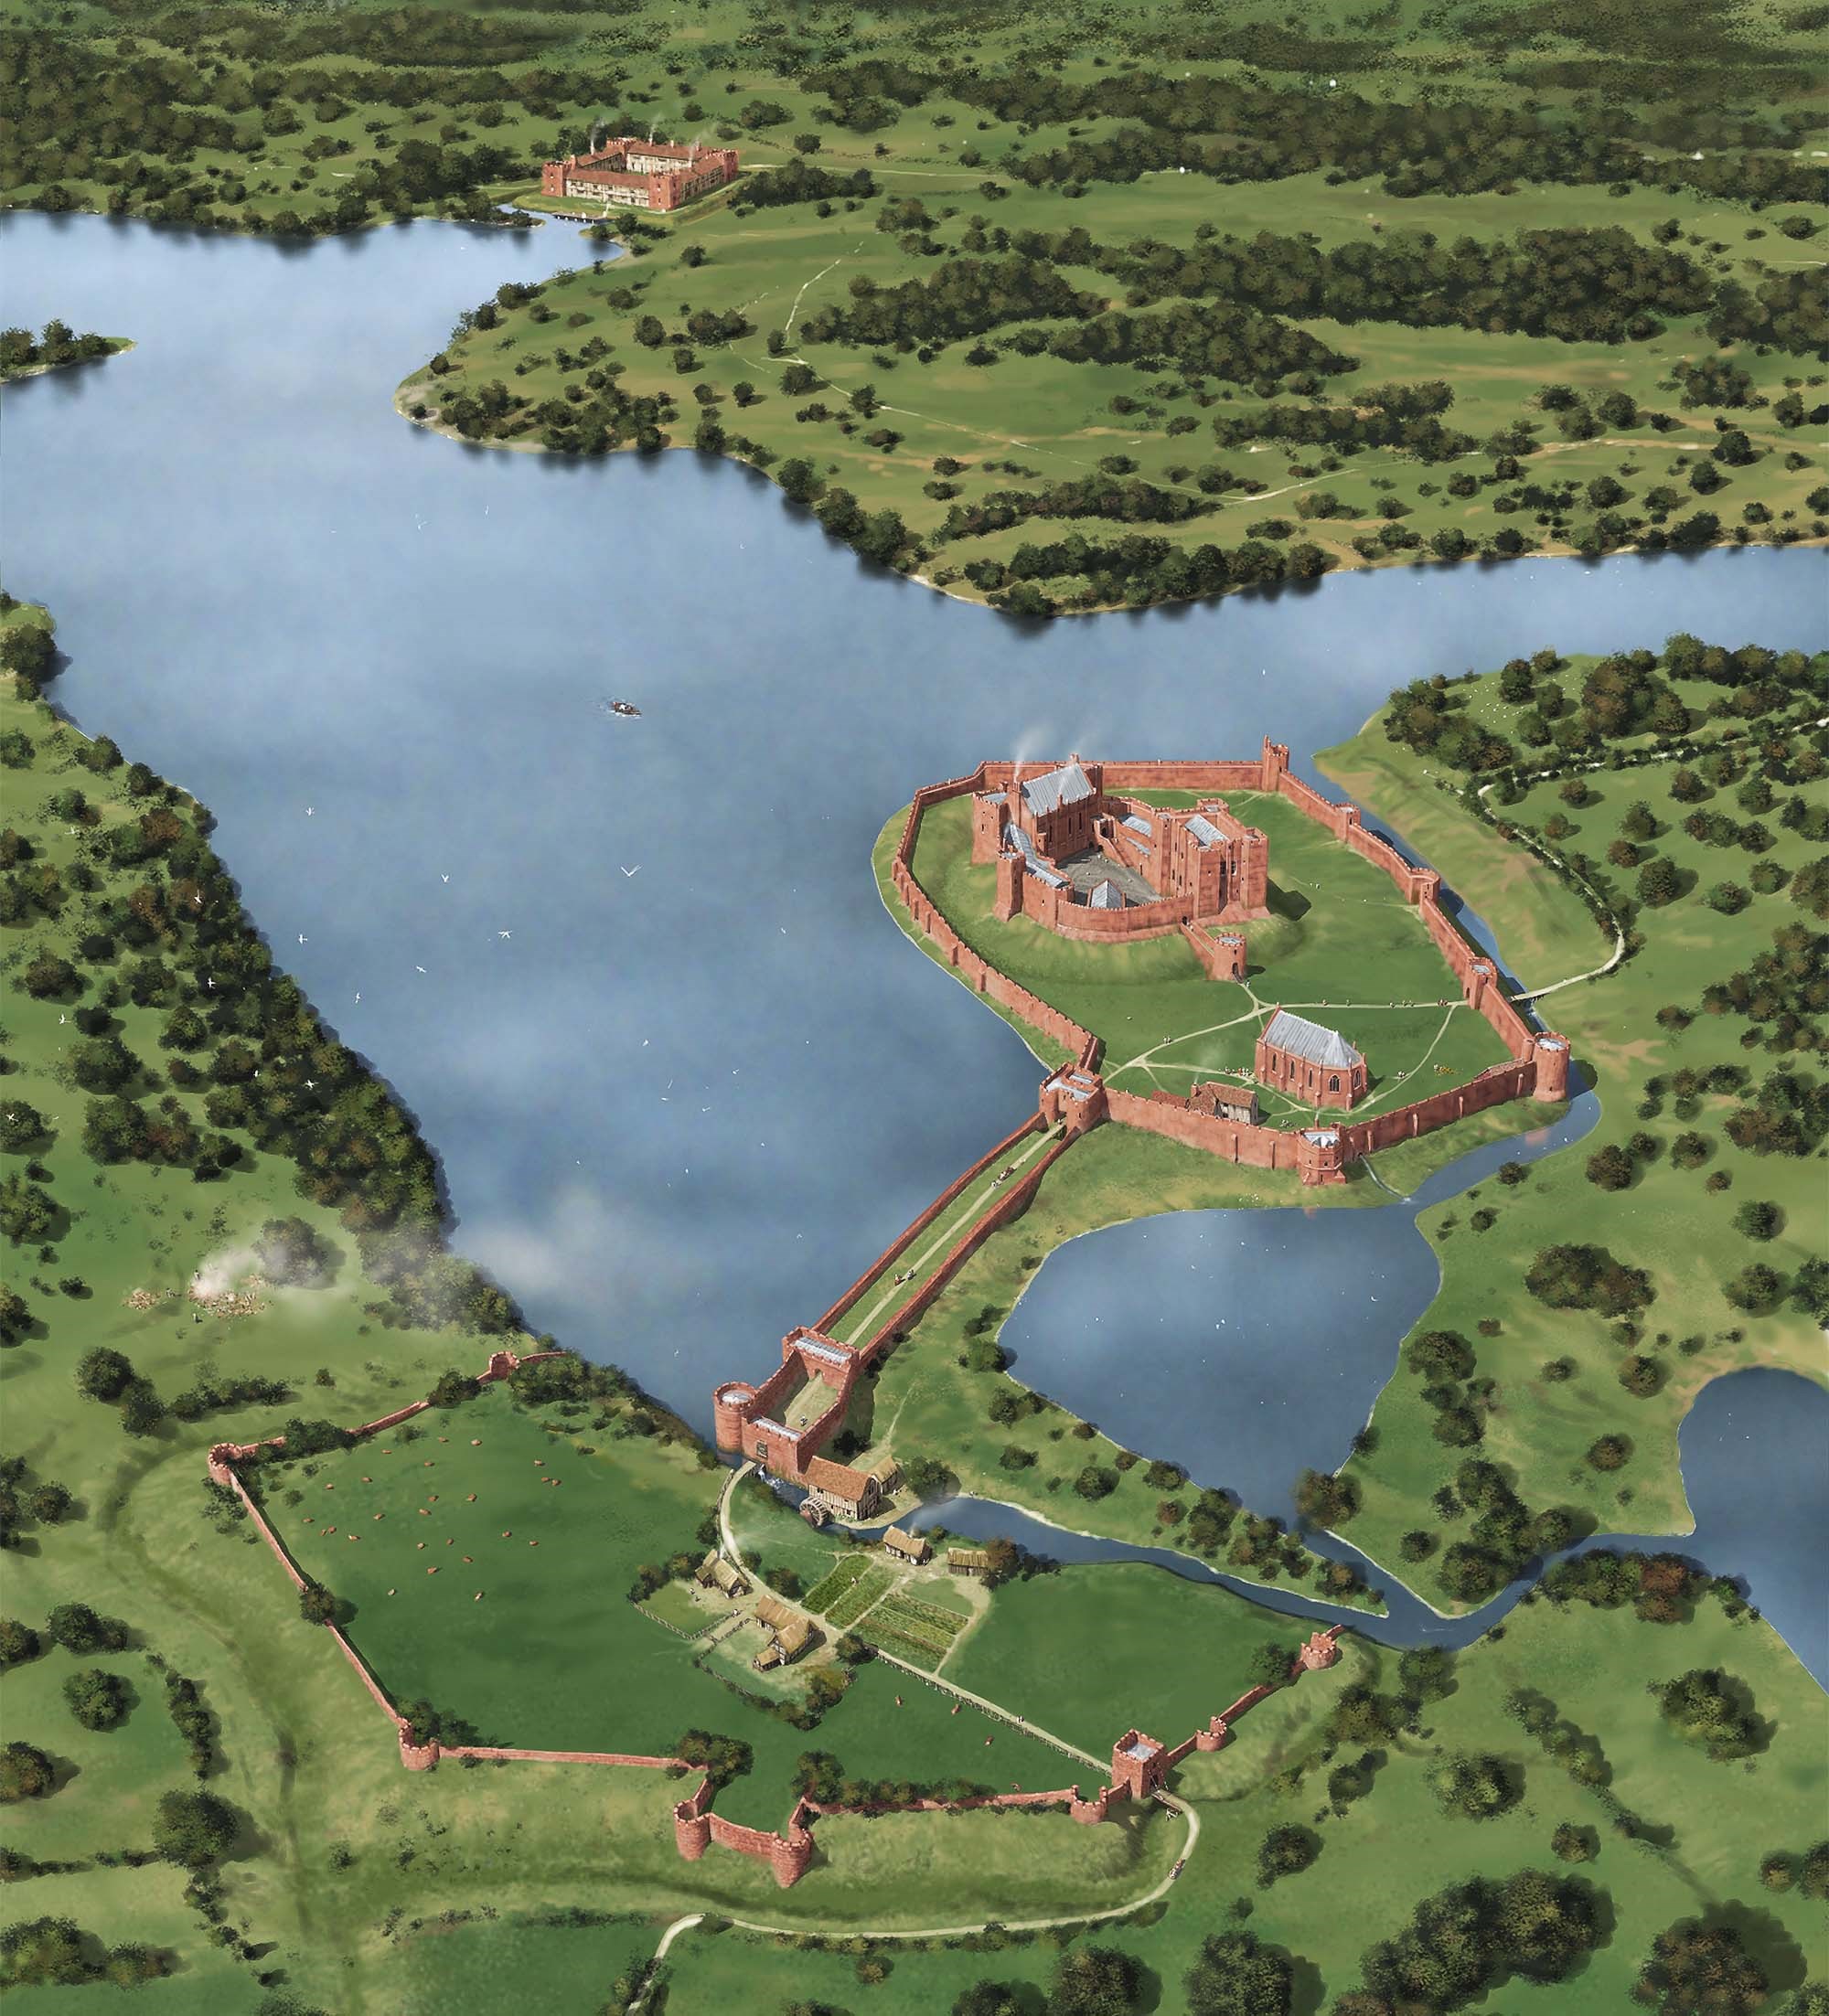 A reconstruction of Kenilworth Castle as it might have appeared in about 1420, showing John of Gaunt